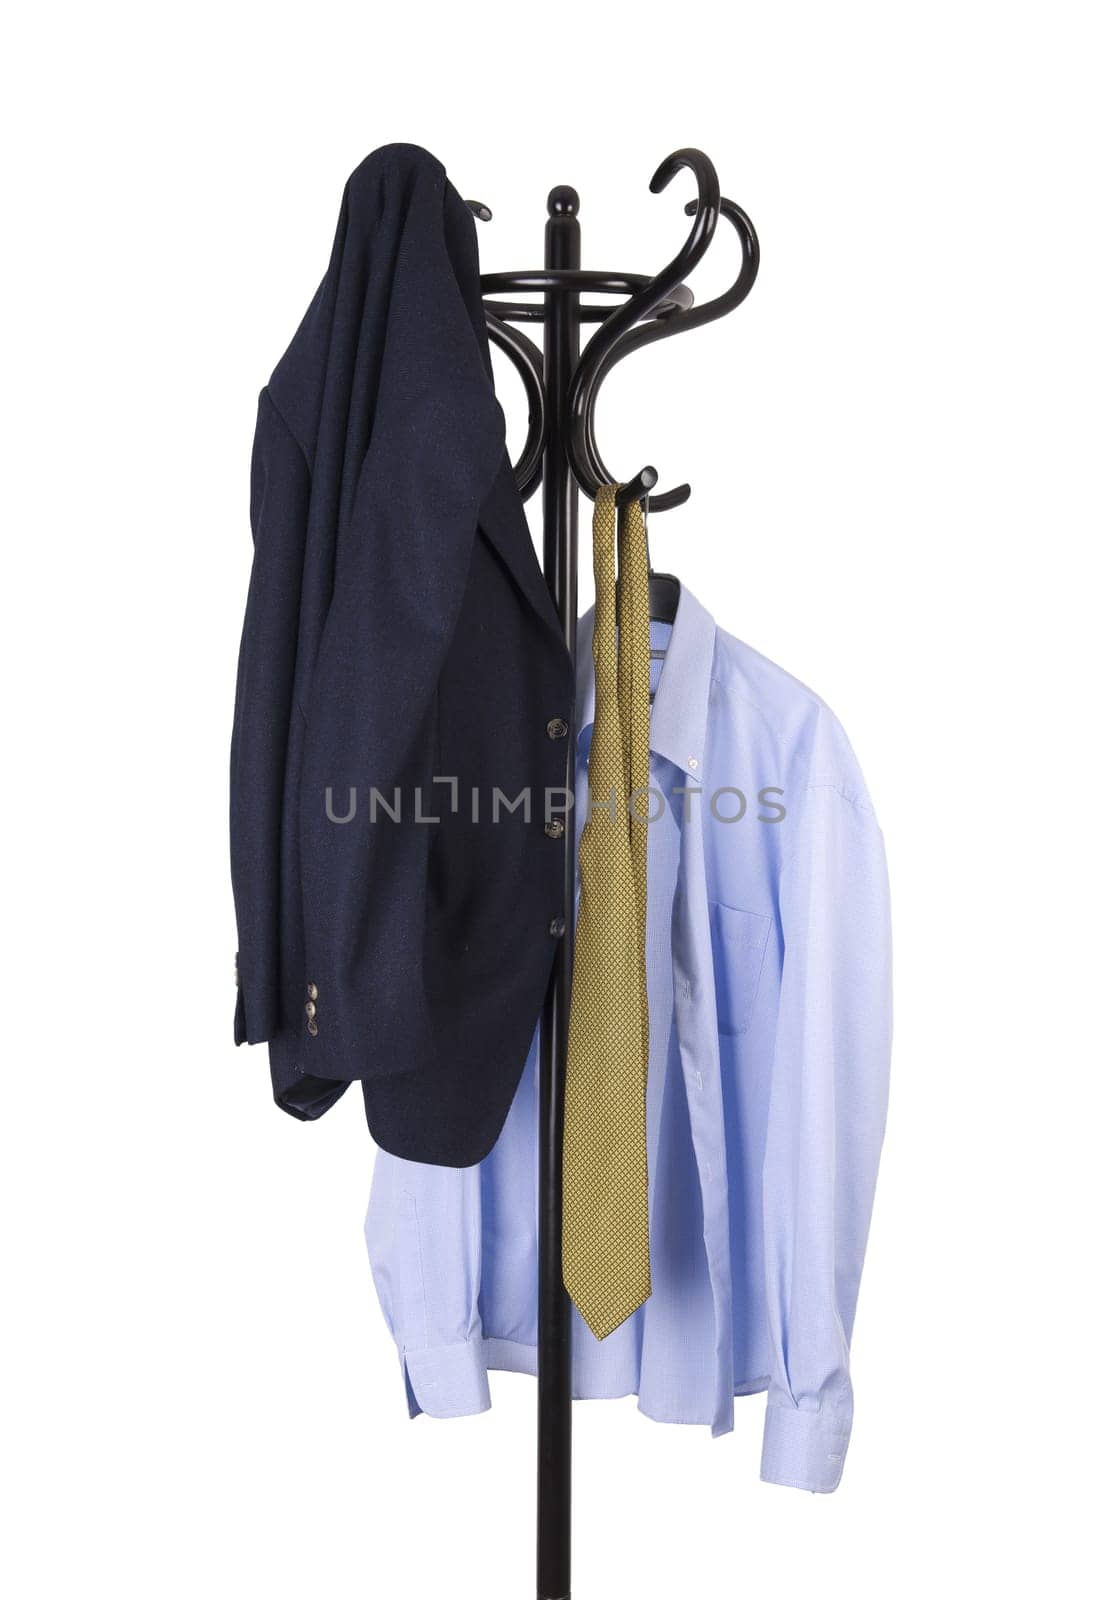 men's clothing on a coat rack by sergiodv